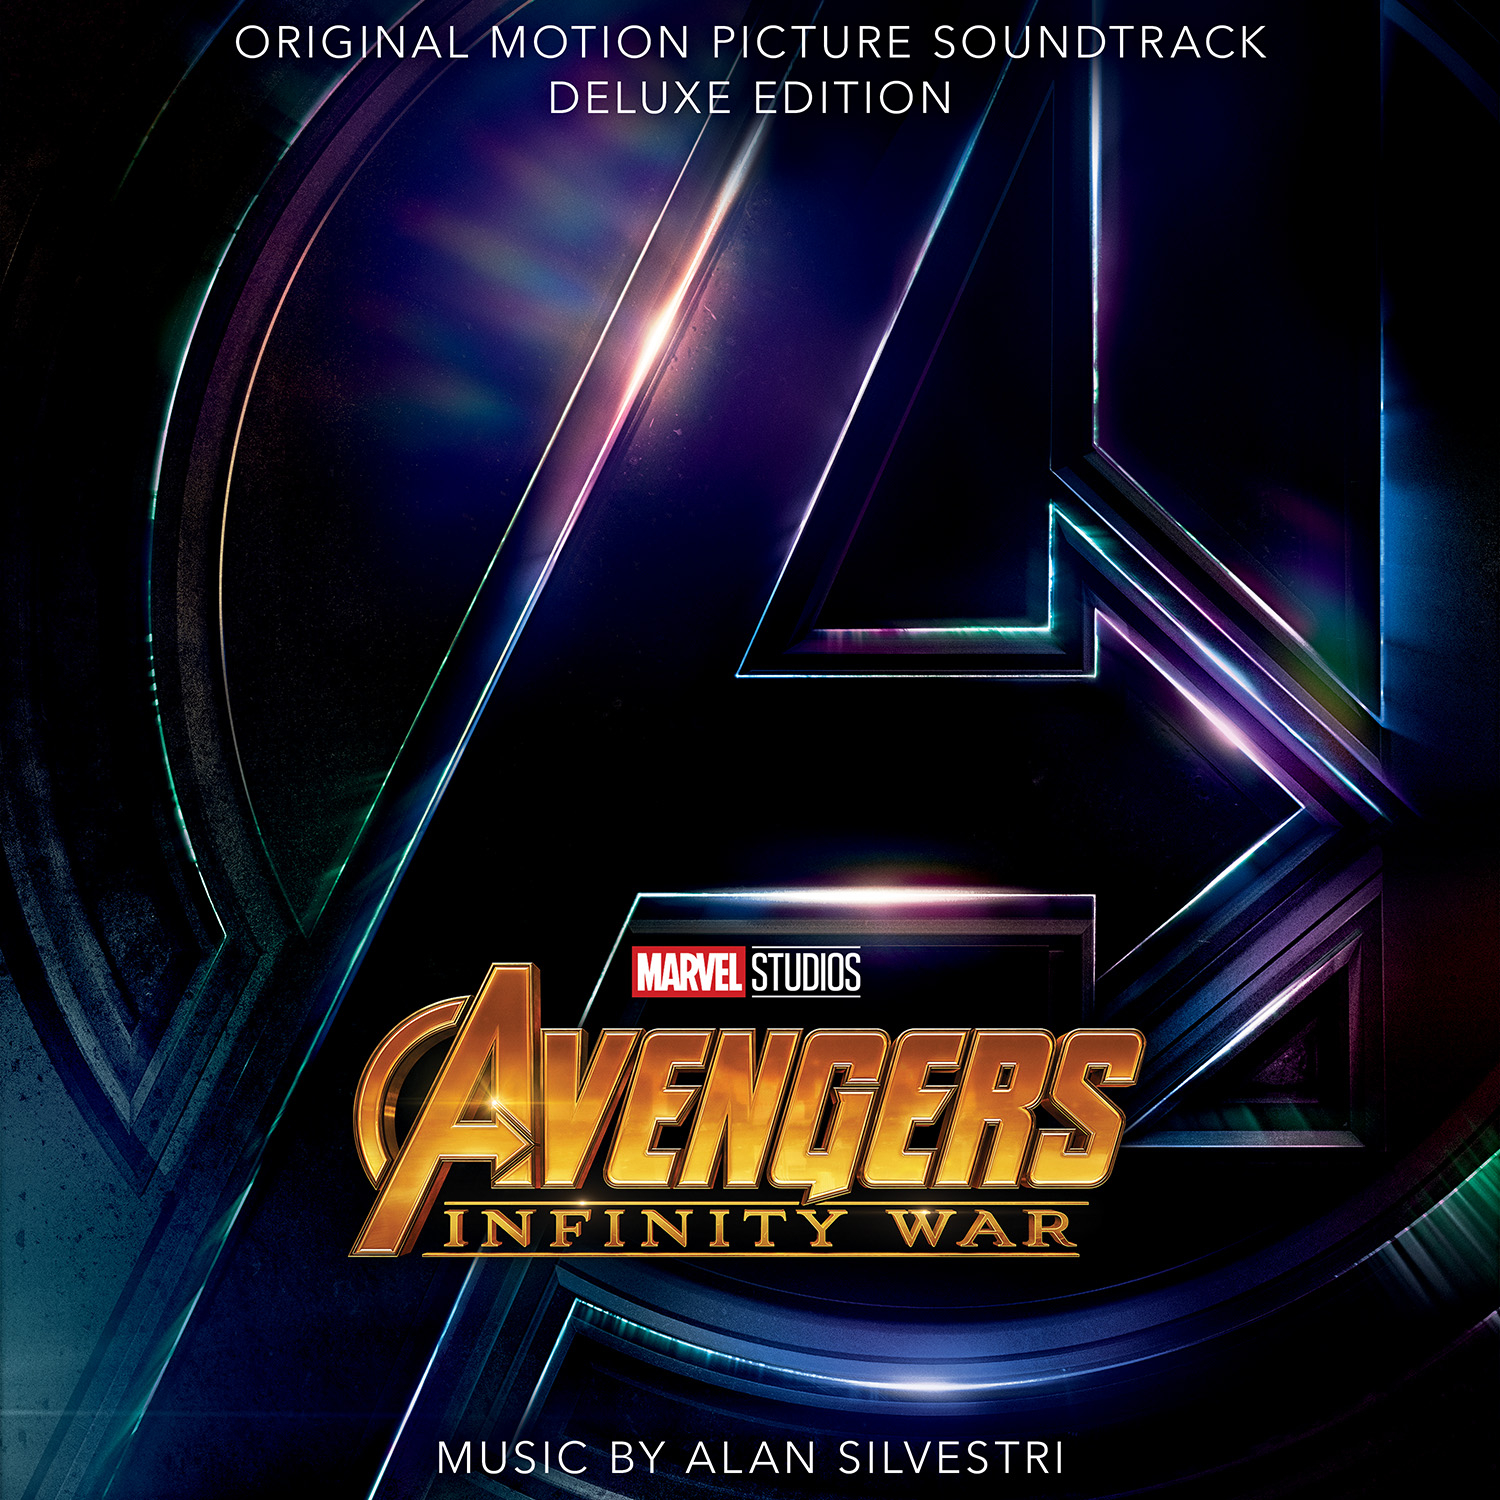 Avengers: Infinity War Soundtrack Review